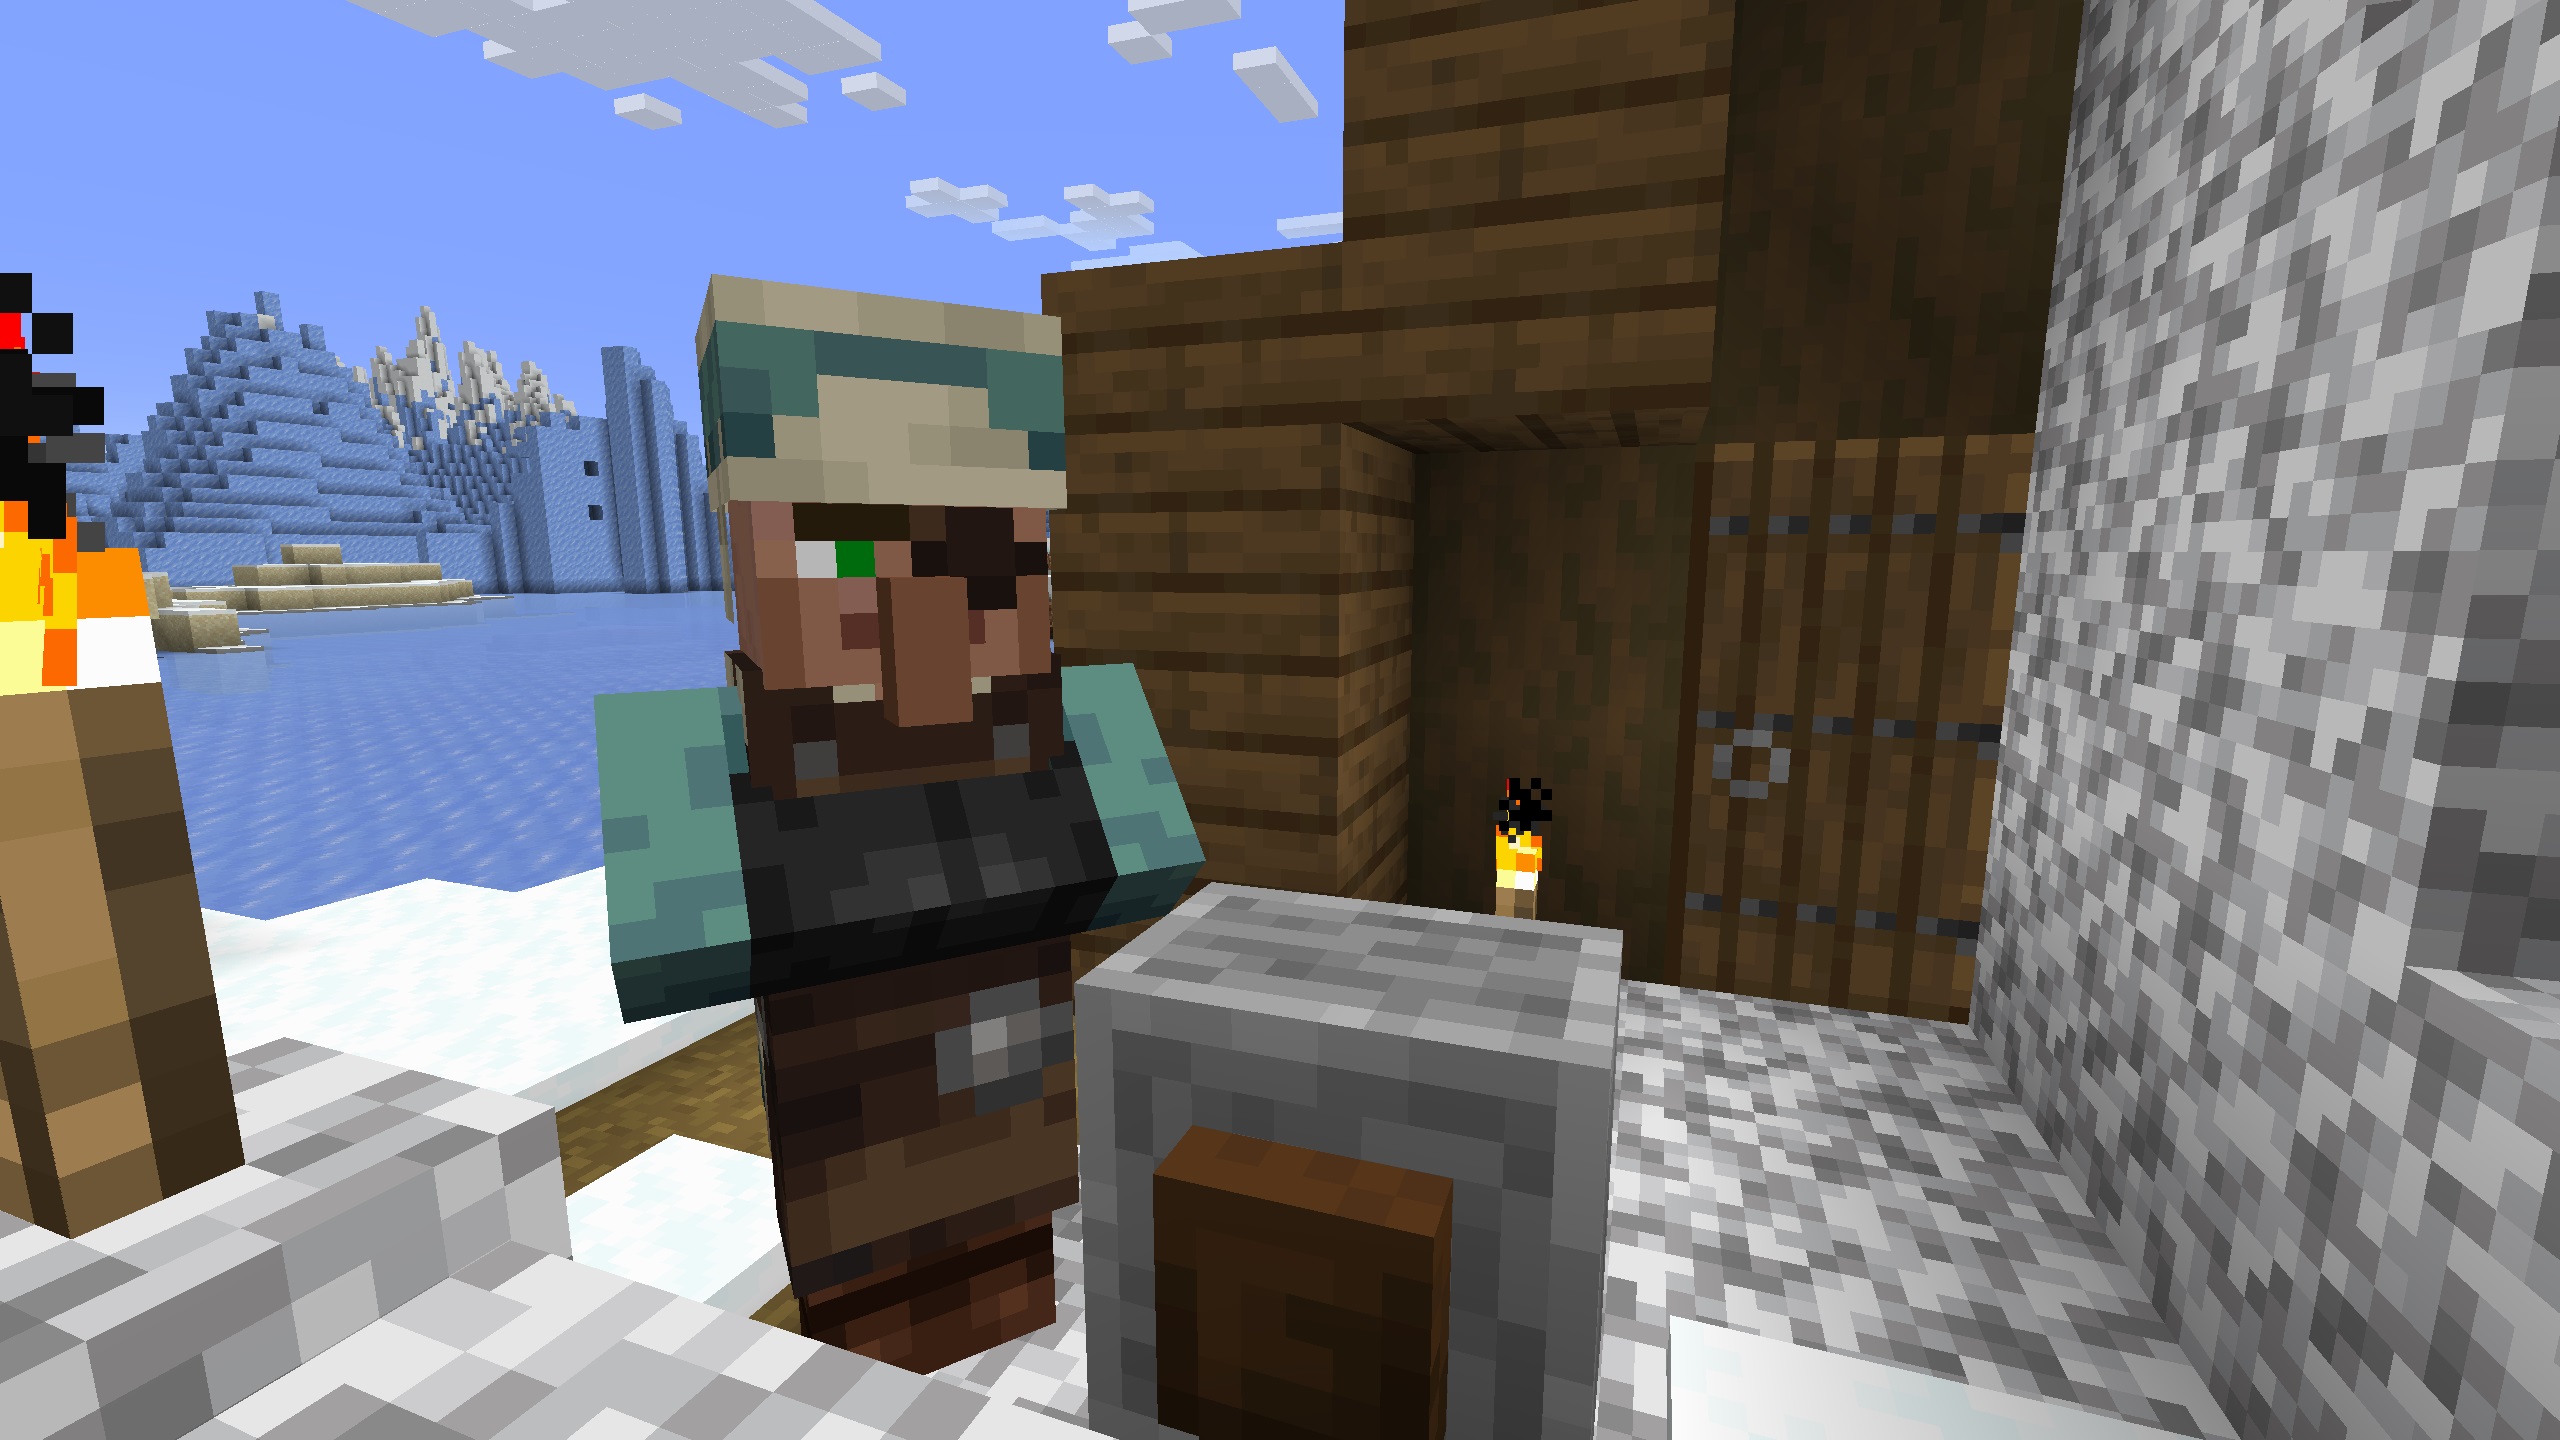 Minecraft Villager - A gunsmith in a snowy town works on a whetstone.